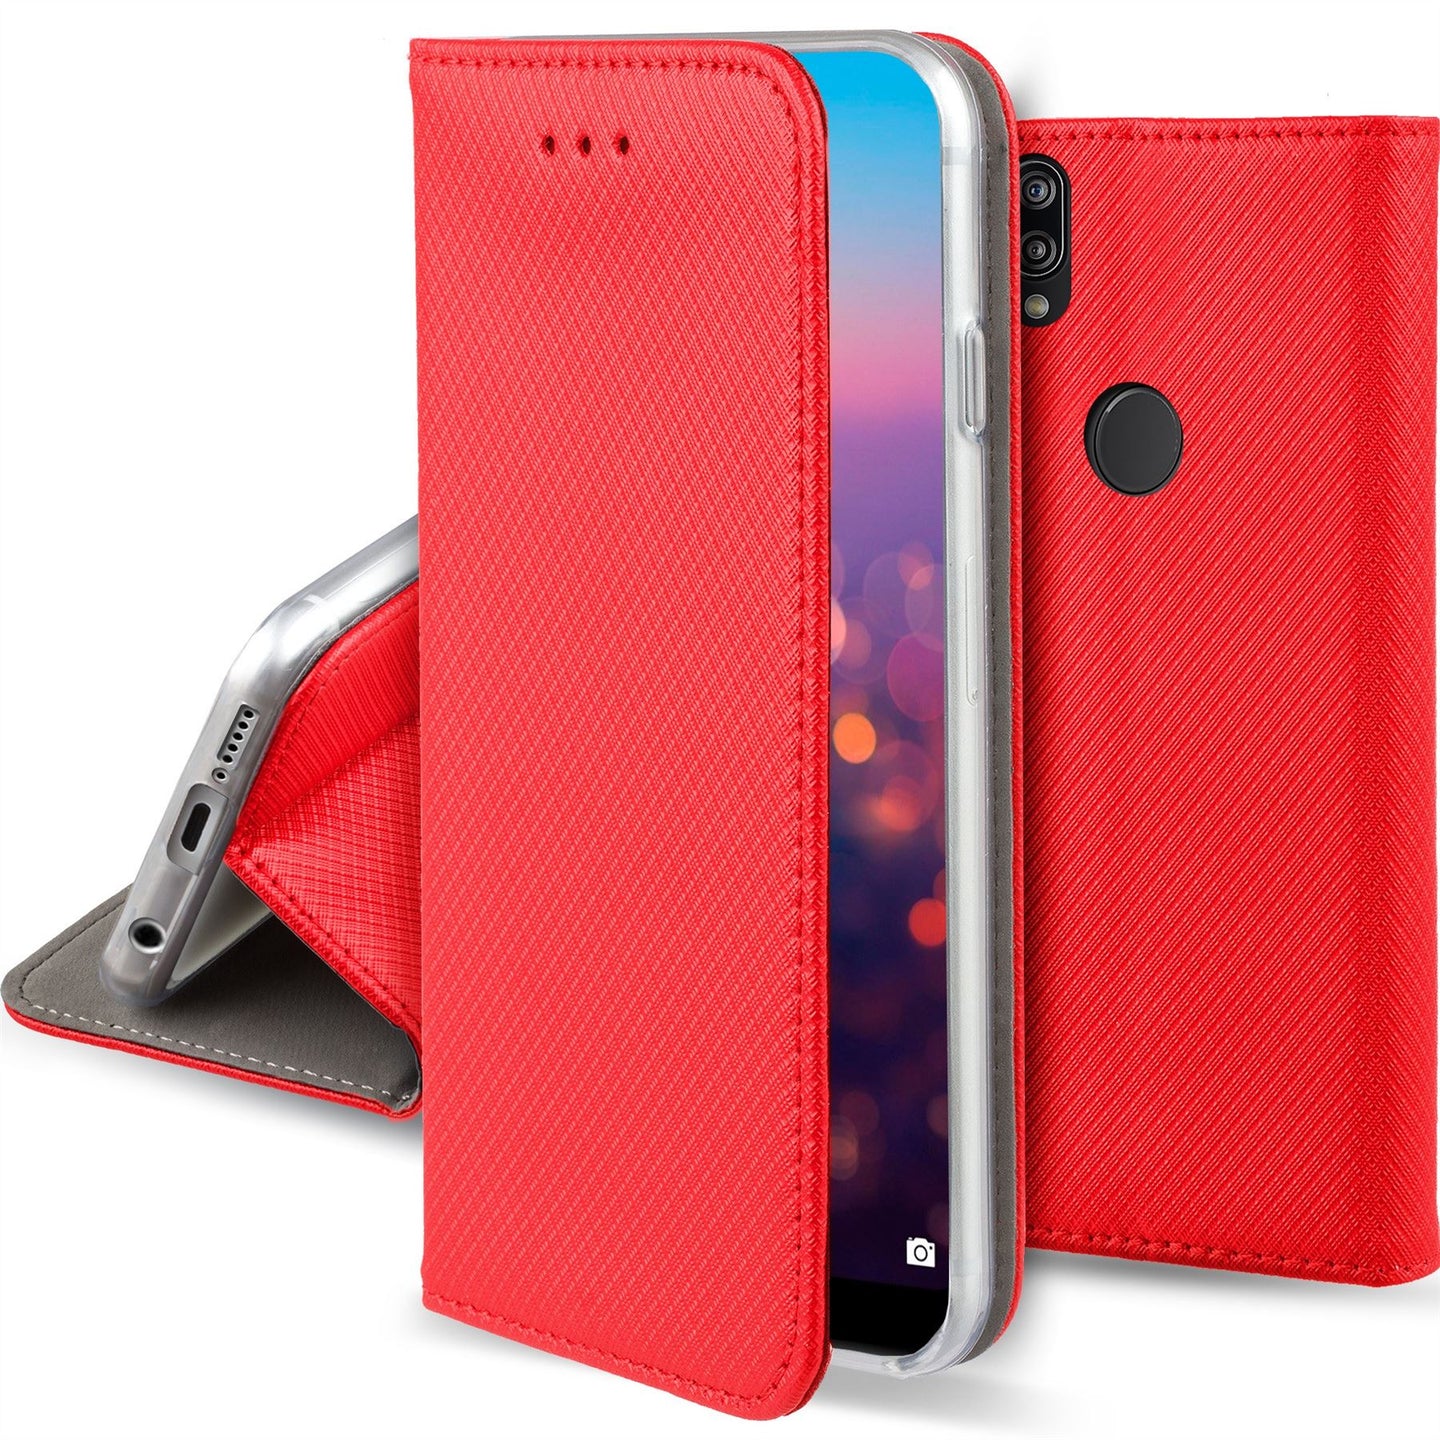 Moozy Case Flip Cover for Huawei P20 Lite, Red - Smart Magnetic Flip Case with Card Holder and Stand